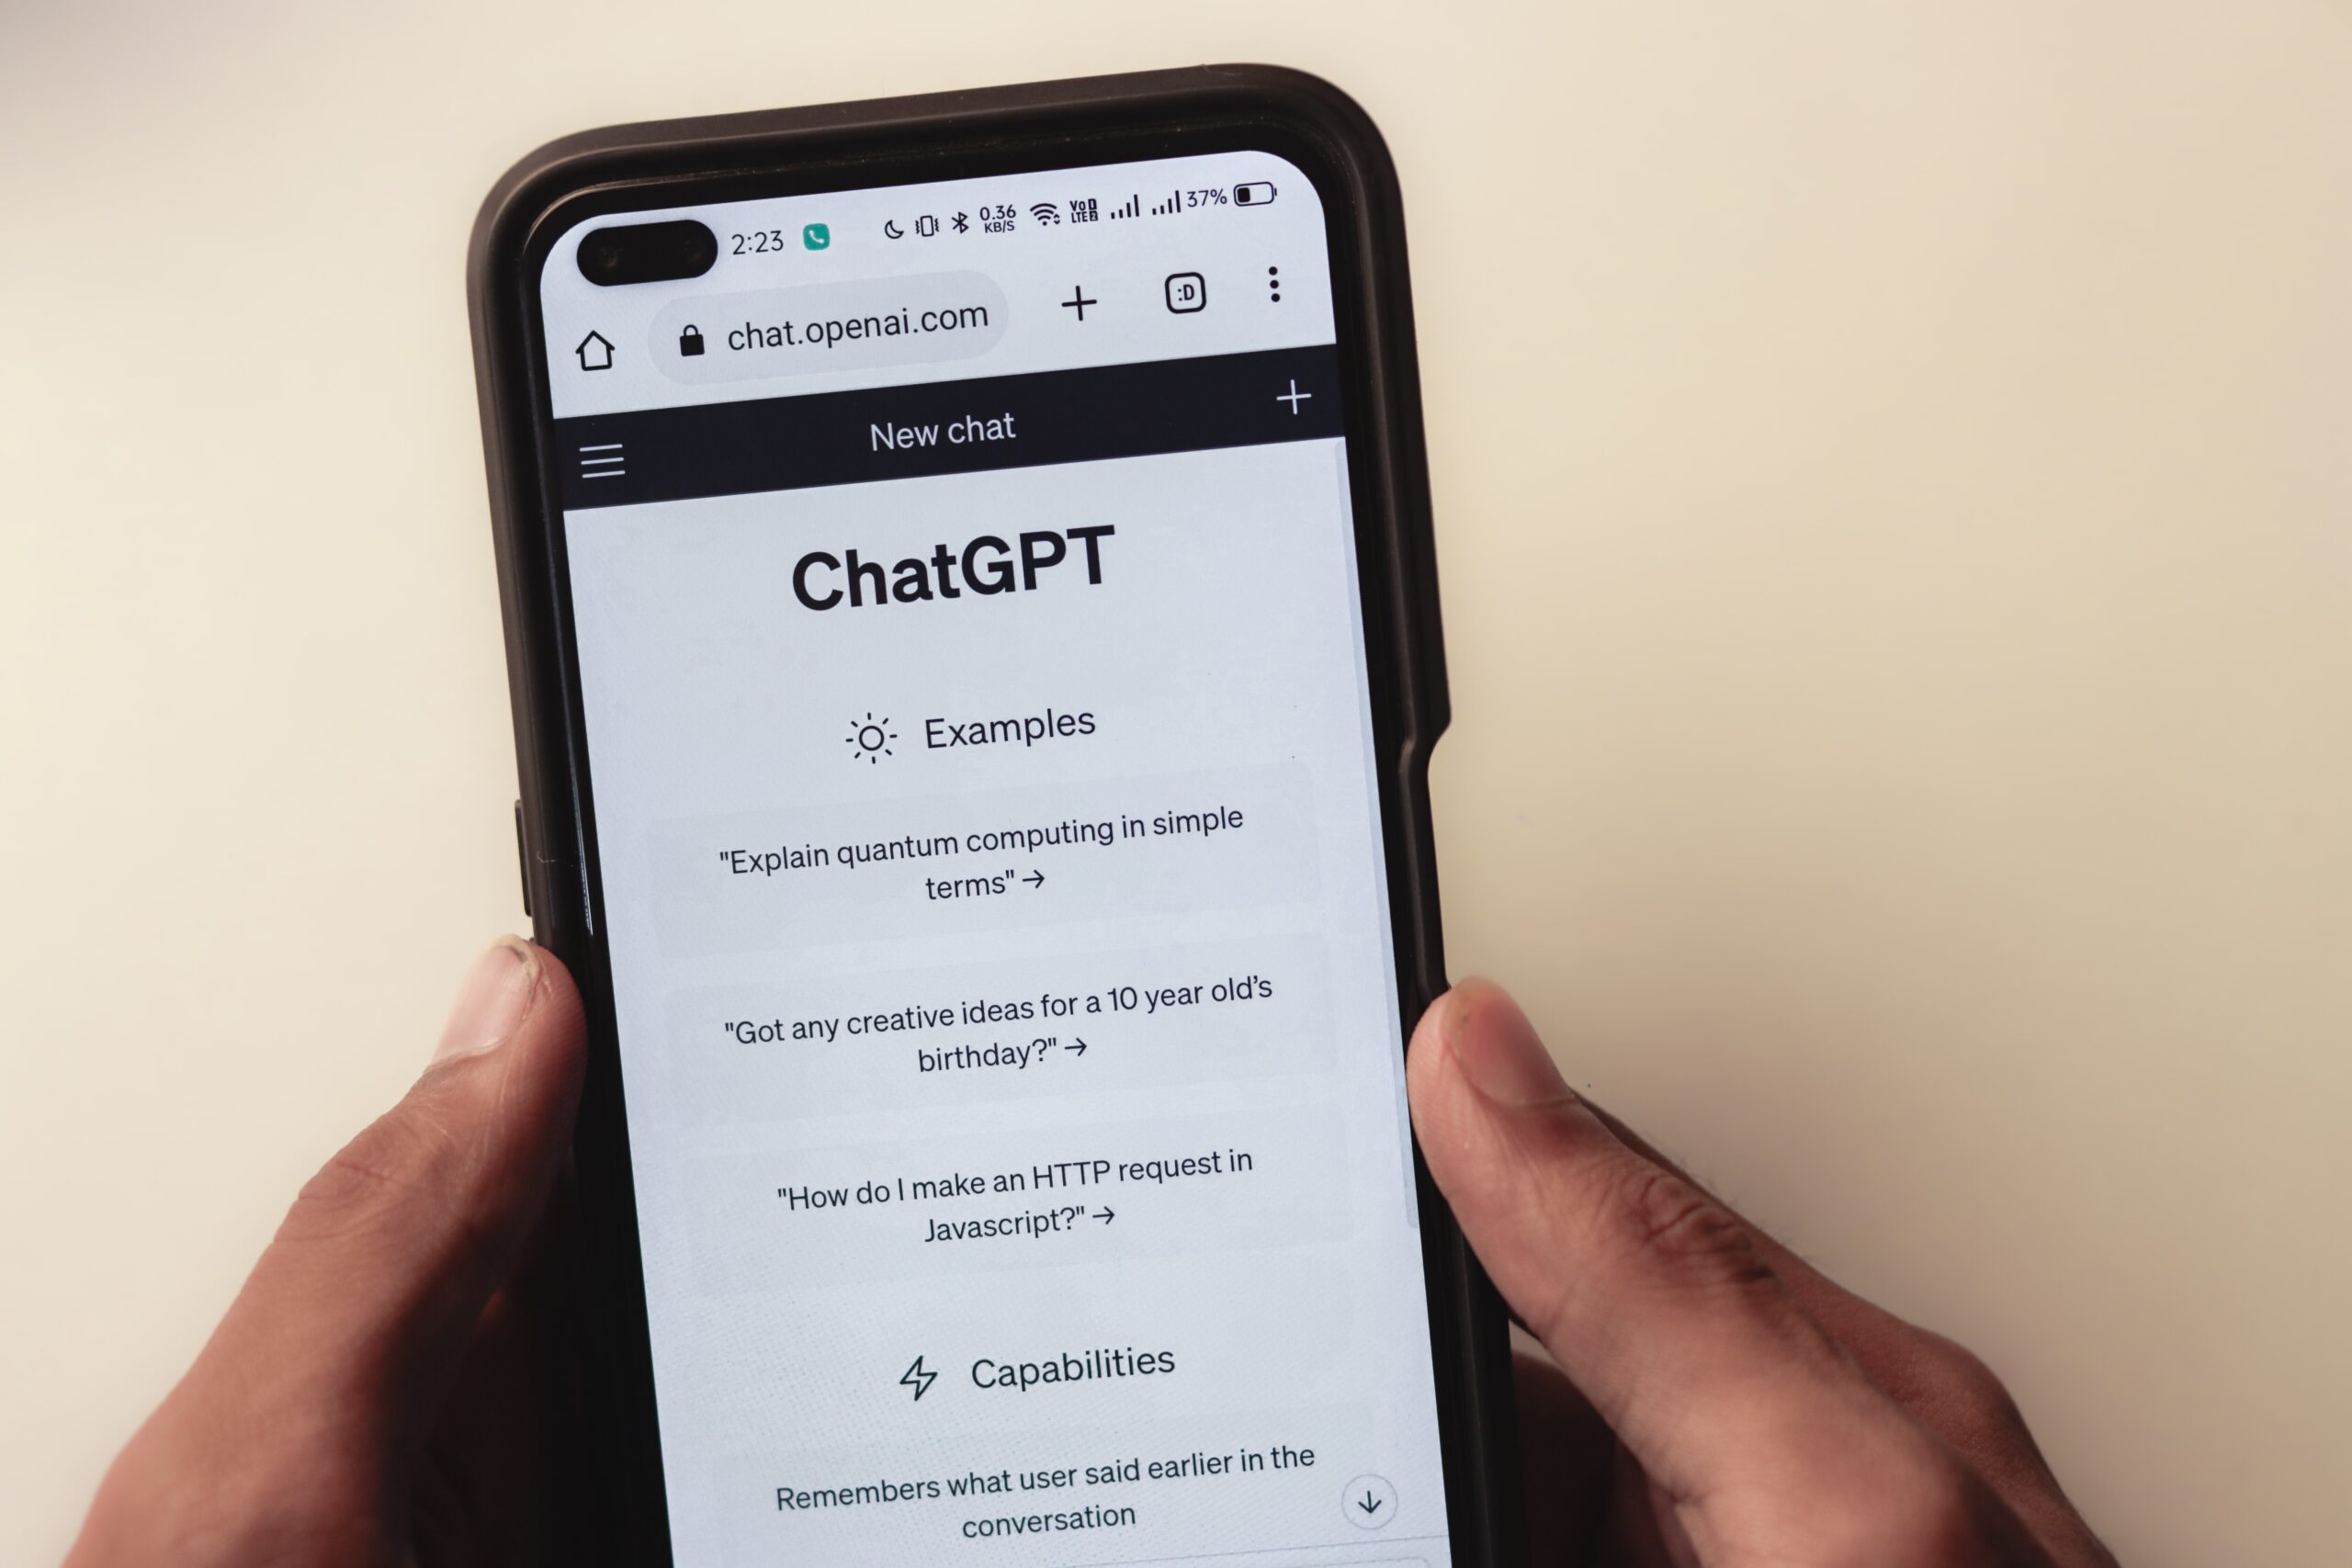 How to Build a Chatbot using Dialogflow and Firebase